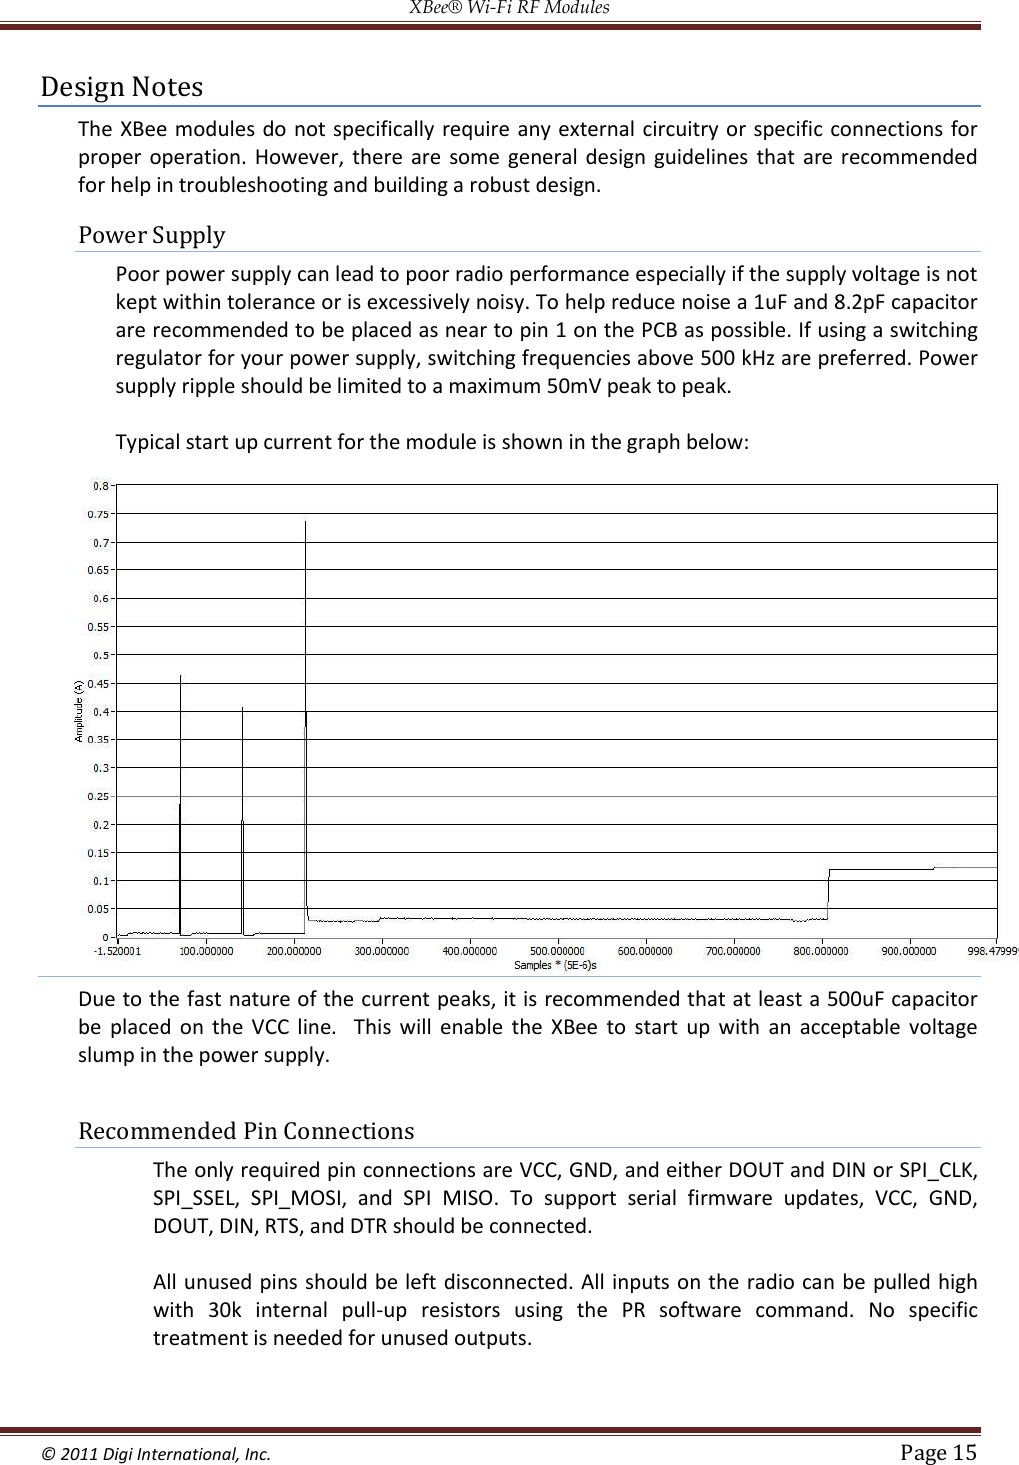 XBee® Wi-Fi RF Modules  © 2011 Digi International, Inc.   Page 15  Design Notes The XBee modules  do not specifically require any external circuitry or specific connections for proper operation.  However,  there  are  some  general design  guidelines that  are recommended for help in troubleshooting and building a robust design. Power Supply Poor power supply can lead to poor radio performance especially if the supply voltage is not kept within tolerance or is excessively noisy. To help reduce noise a 1uF and 8.2pF capacitor are recommended to be placed as near to pin 1 on the PCB as possible. If using a switching regulator for your power supply, switching frequencies above 500 kHz are preferred. Power supply ripple should be limited to a maximum 50mV peak to peak.  Typical start up current for the module is shown in the graph below:    Due to the fast nature of the current peaks, it is recommended that at least a 500uF capacitor be  placed  on  the  VCC  line.    This  will  enable  the  XBee  to  start  up  with  an  acceptable  voltage slump in the power supply.  Recommended Pin Connections The only required pin connections are VCC, GND, and either DOUT and DIN or SPI_CLK, SPI_SSEL,  SPI_MOSI,  and  SPI  MISO.  To  support  serial  firmware  updates,  VCC,  GND, DOUT, DIN, RTS, and DTR should be connected.   All unused pins should be left disconnected. All inputs on the radio can be pulled high with  30k  internal  pull-up  resistors  using  the  PR  software  command.  No  specific treatment is needed for unused outputs.   